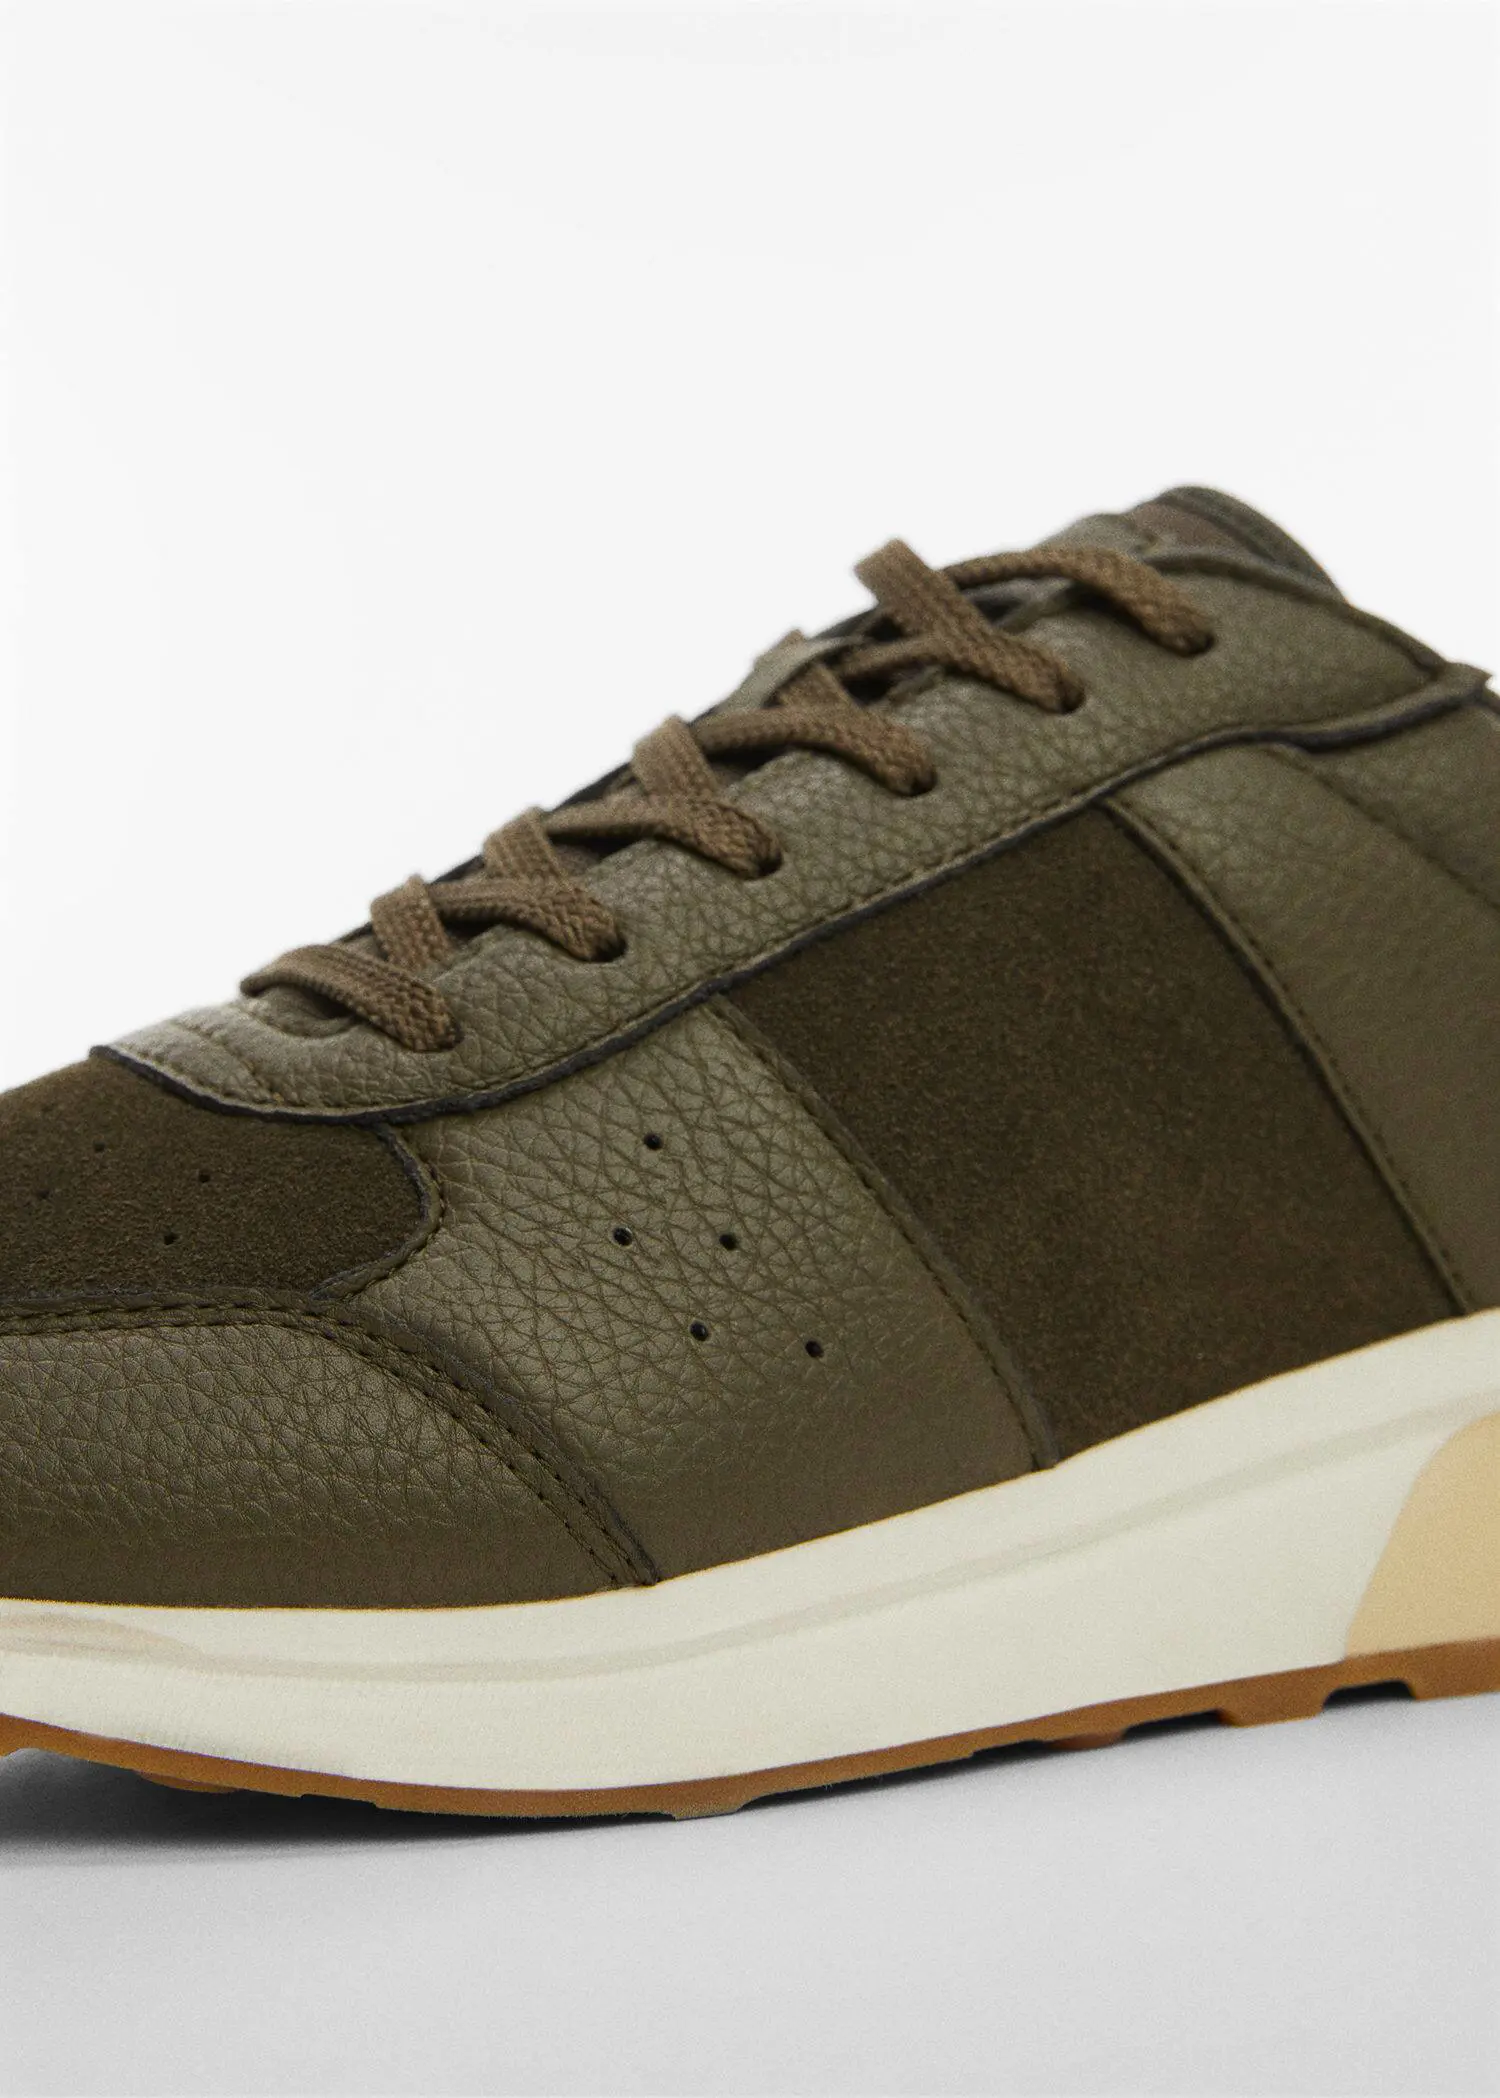 Mango Leather mixed sneakers. 2